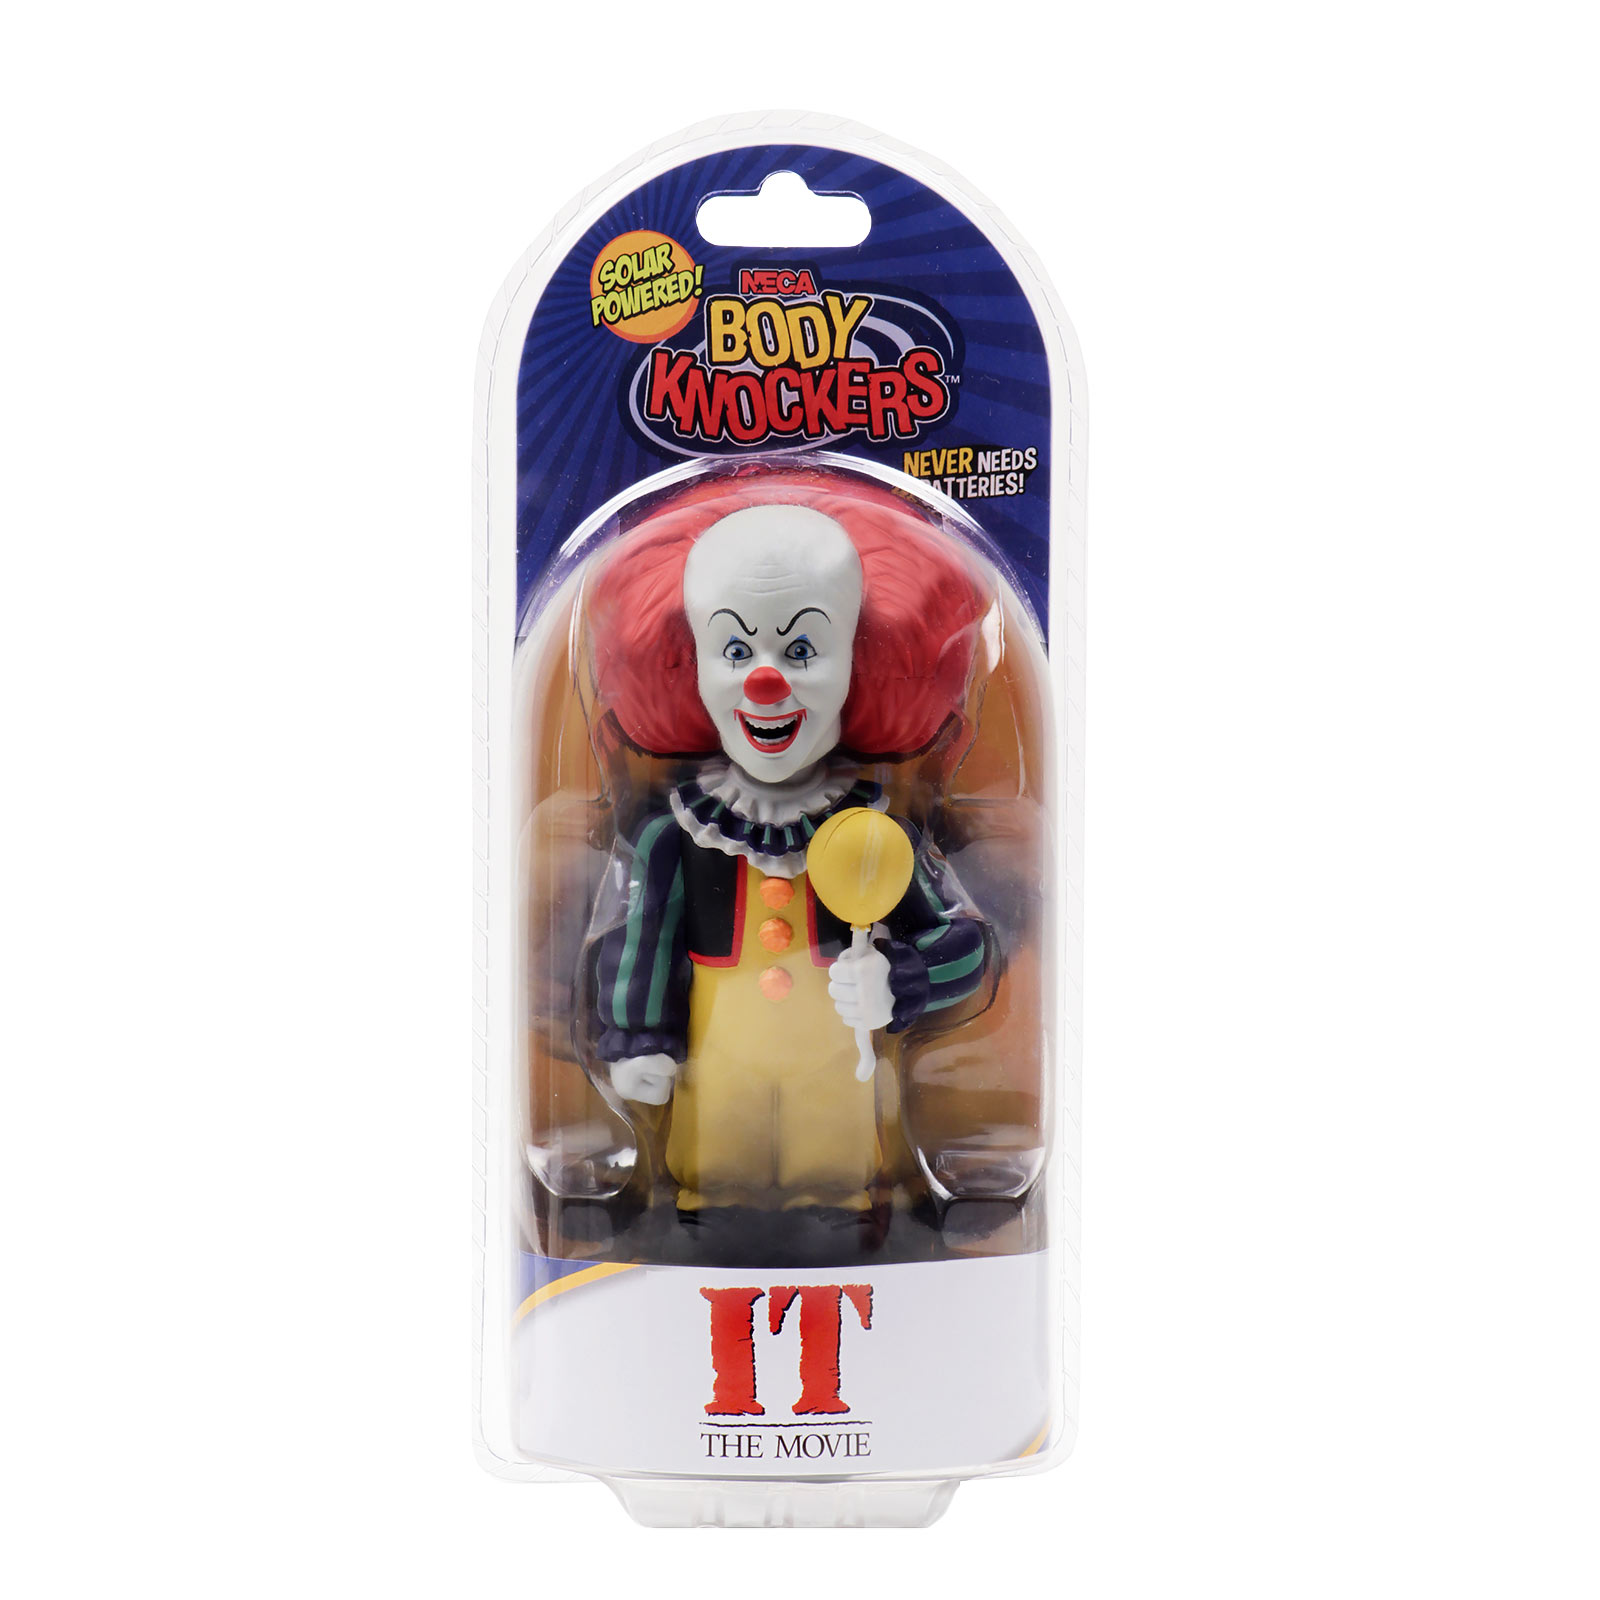 Stephen King's IT - Pennywise 1990 Body Knockers Solar Bobblehead